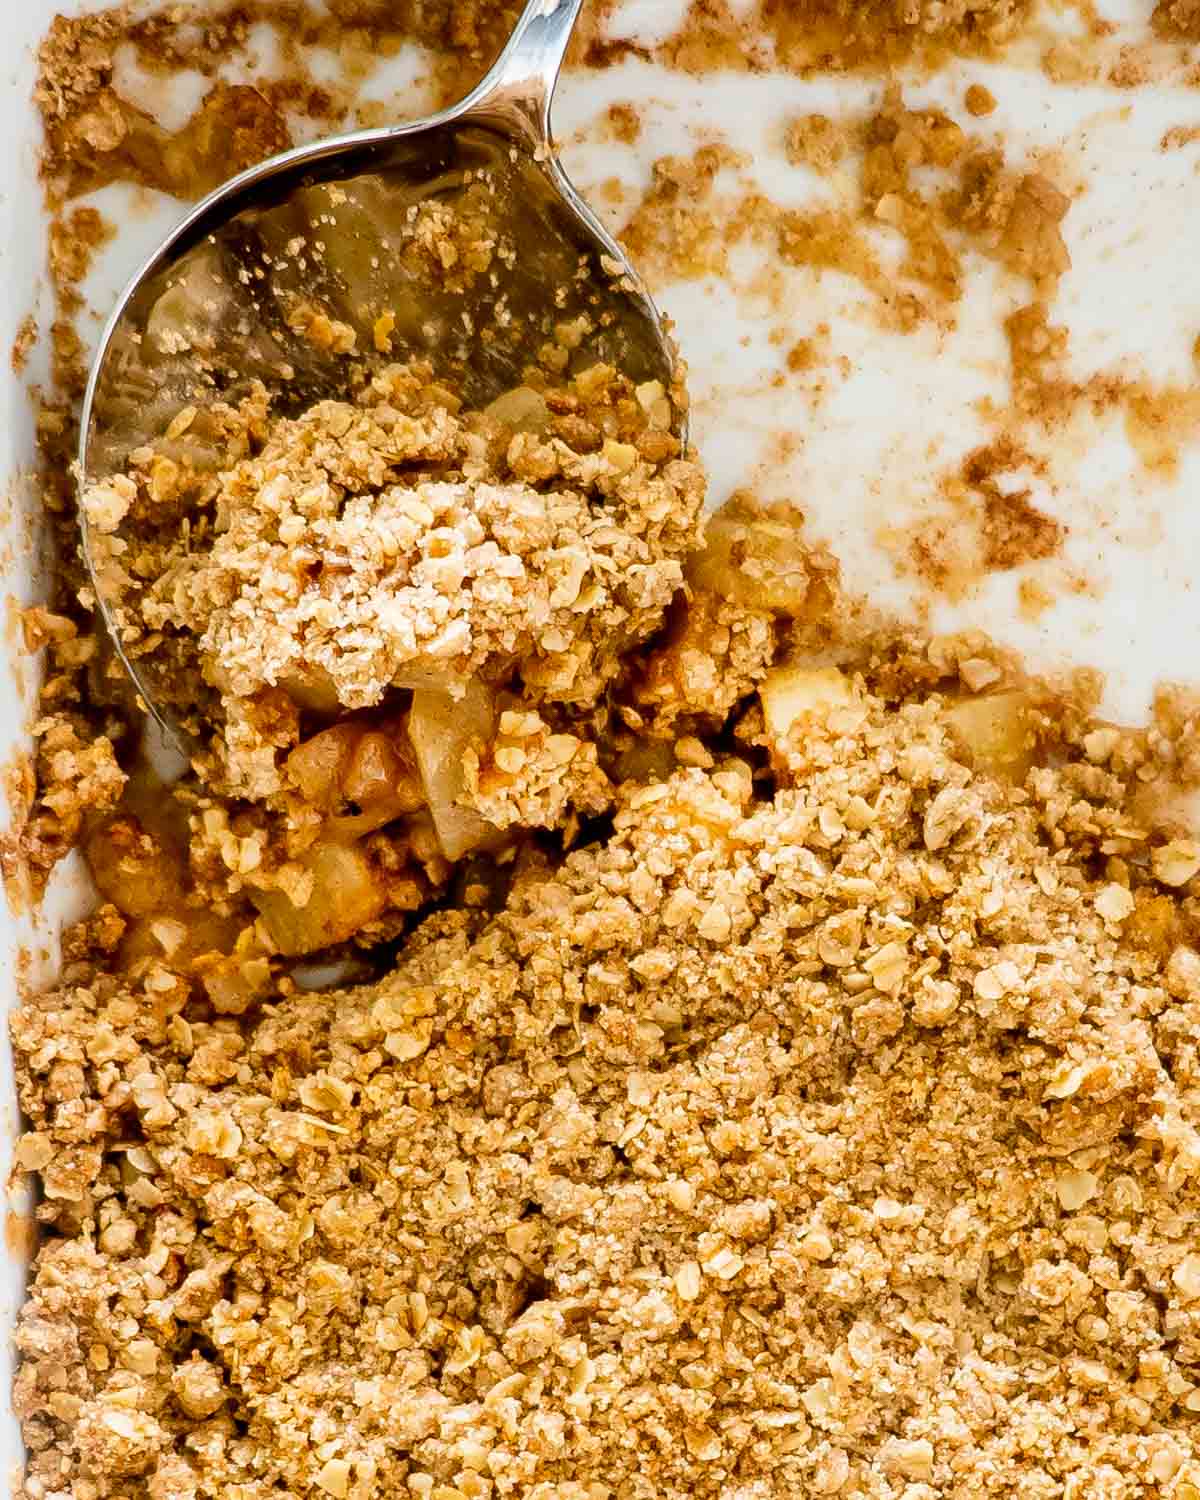 apple crumble in a baking dish with a serving spoon inside.